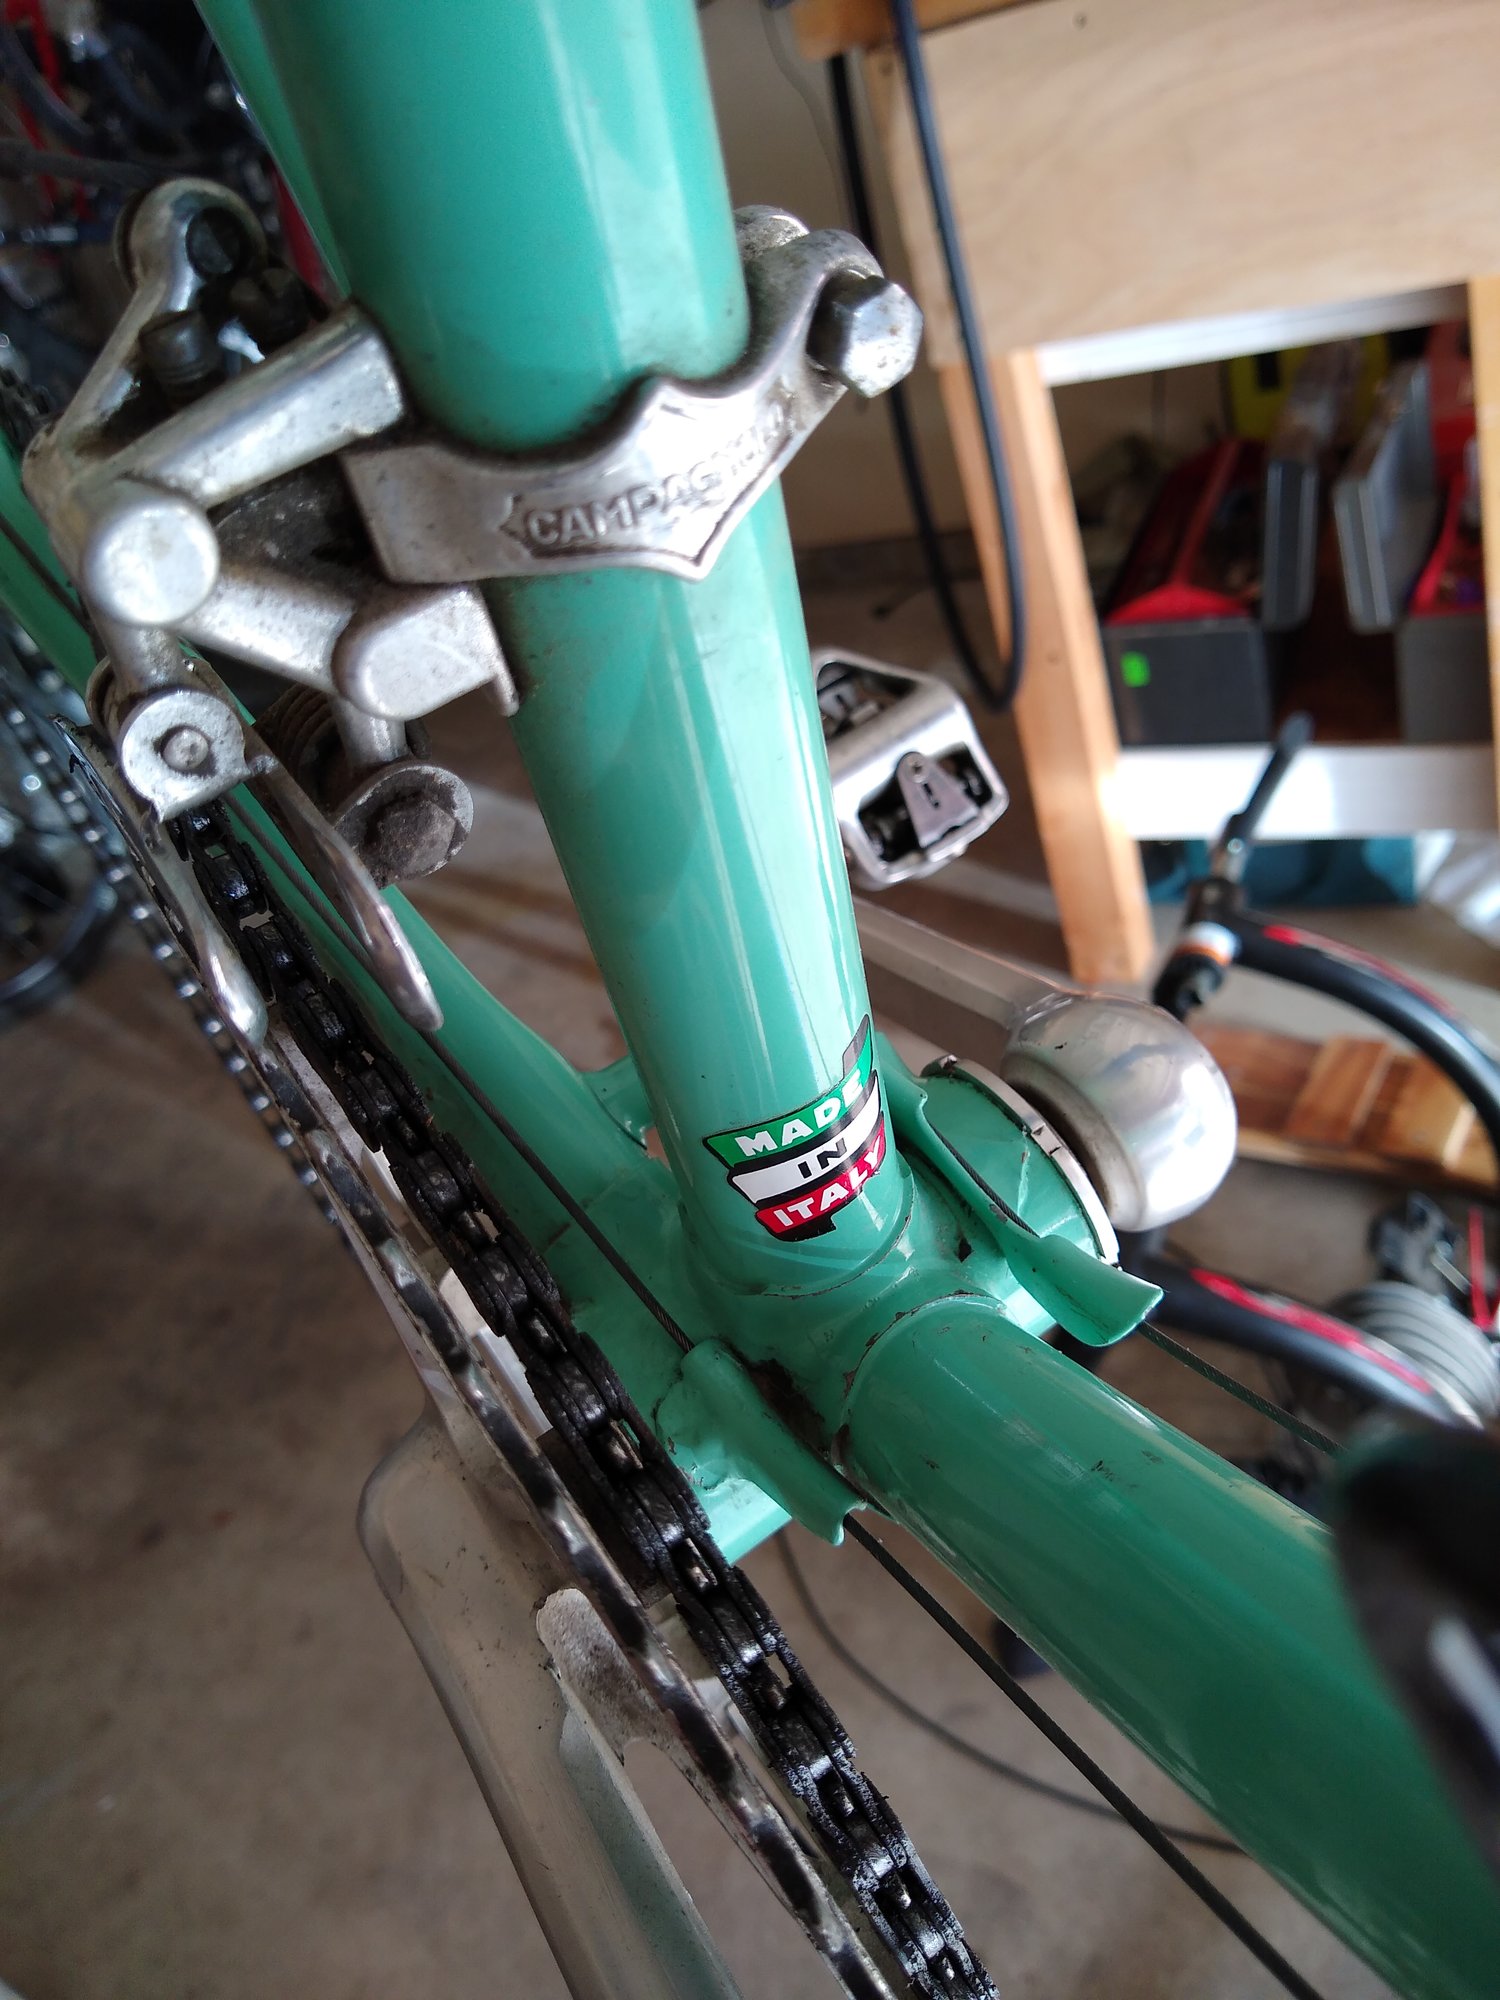 bianchi bicycle serial numbers